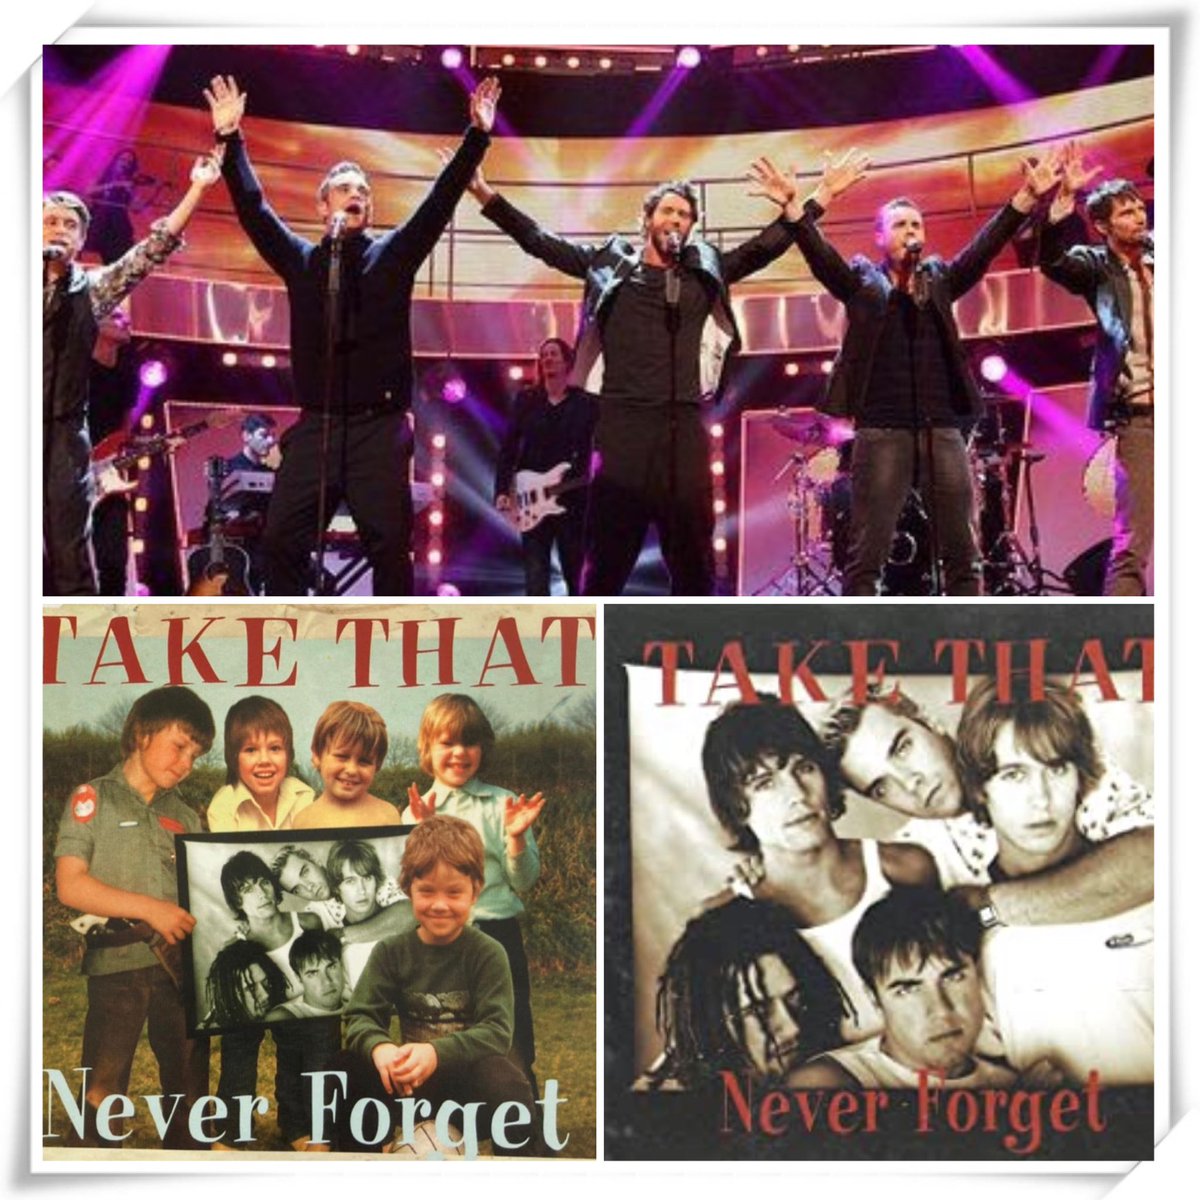 Happy 27th birthday to this Amazing song “Never forget” Such a classic song! 🎶 🎶 @takethat @GaryBarlow @OfficialMarkO @HowardDonald @robbiewilliams #jasonorange #HappyBirthdayNeverForget #thatters #90sclassic 
🙌🙌🙌🙌🙌🙌🙌🙌🙌🙌🙌